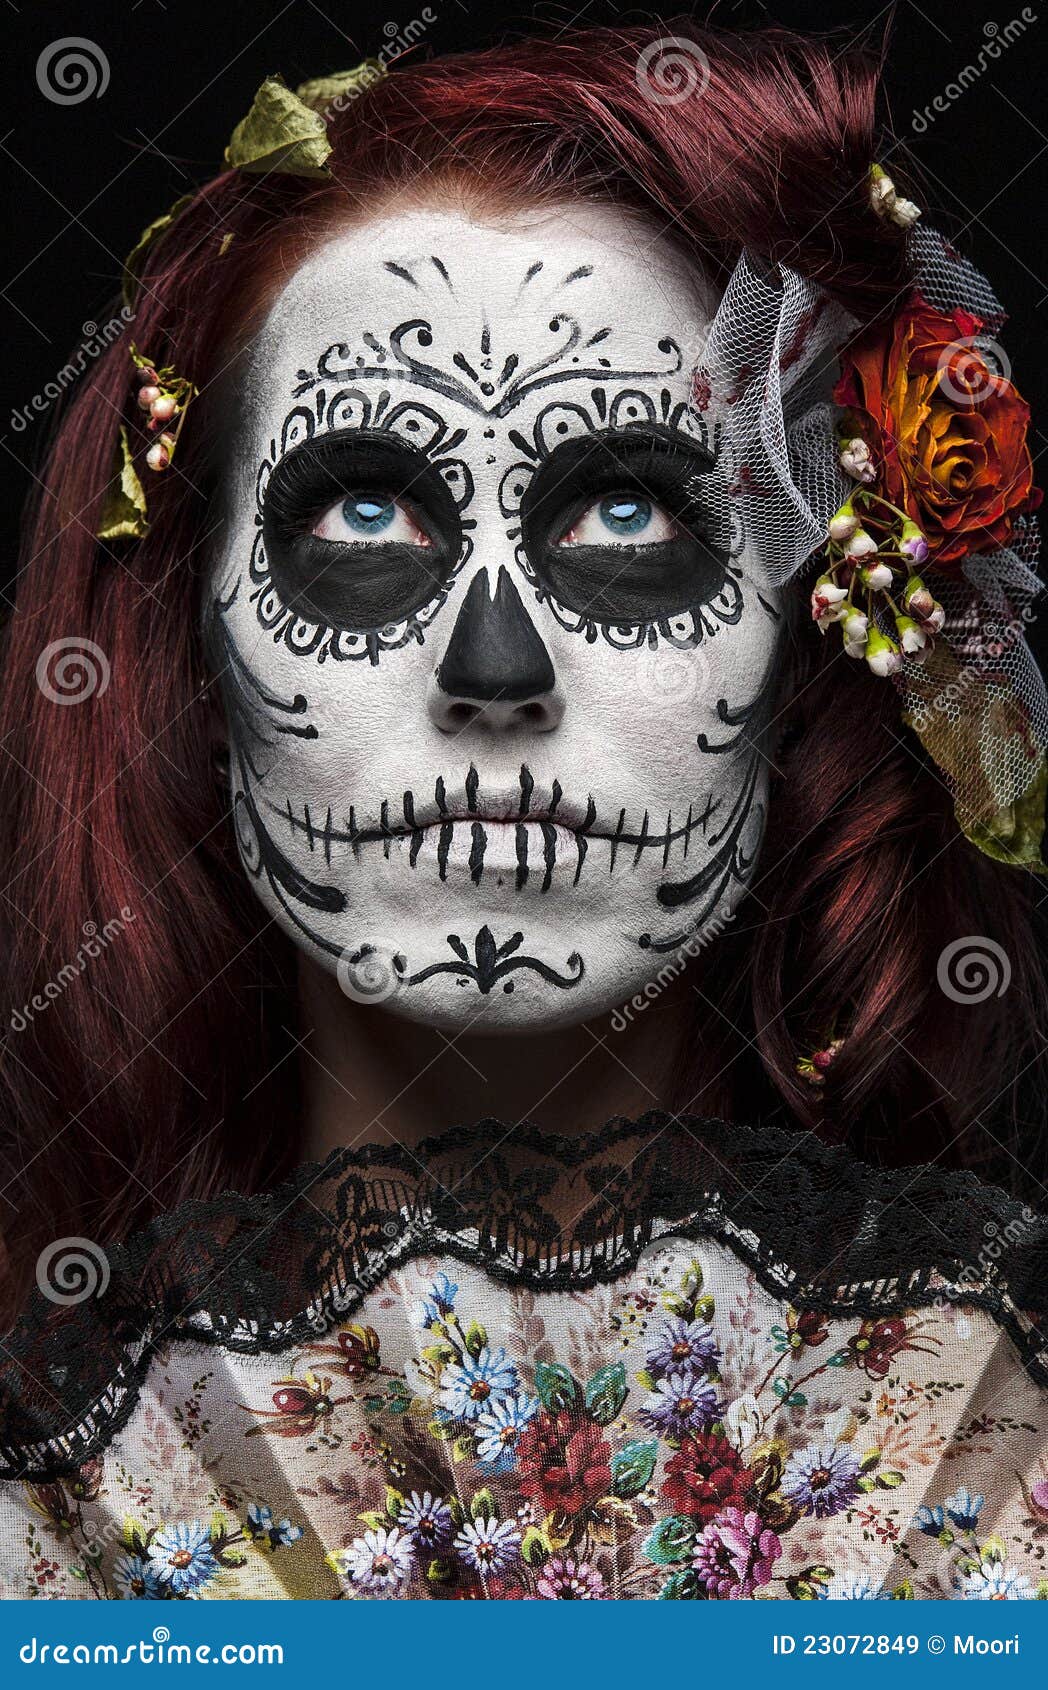 Day Of The Dead Royalty Free Stock Images - Image: 23072849